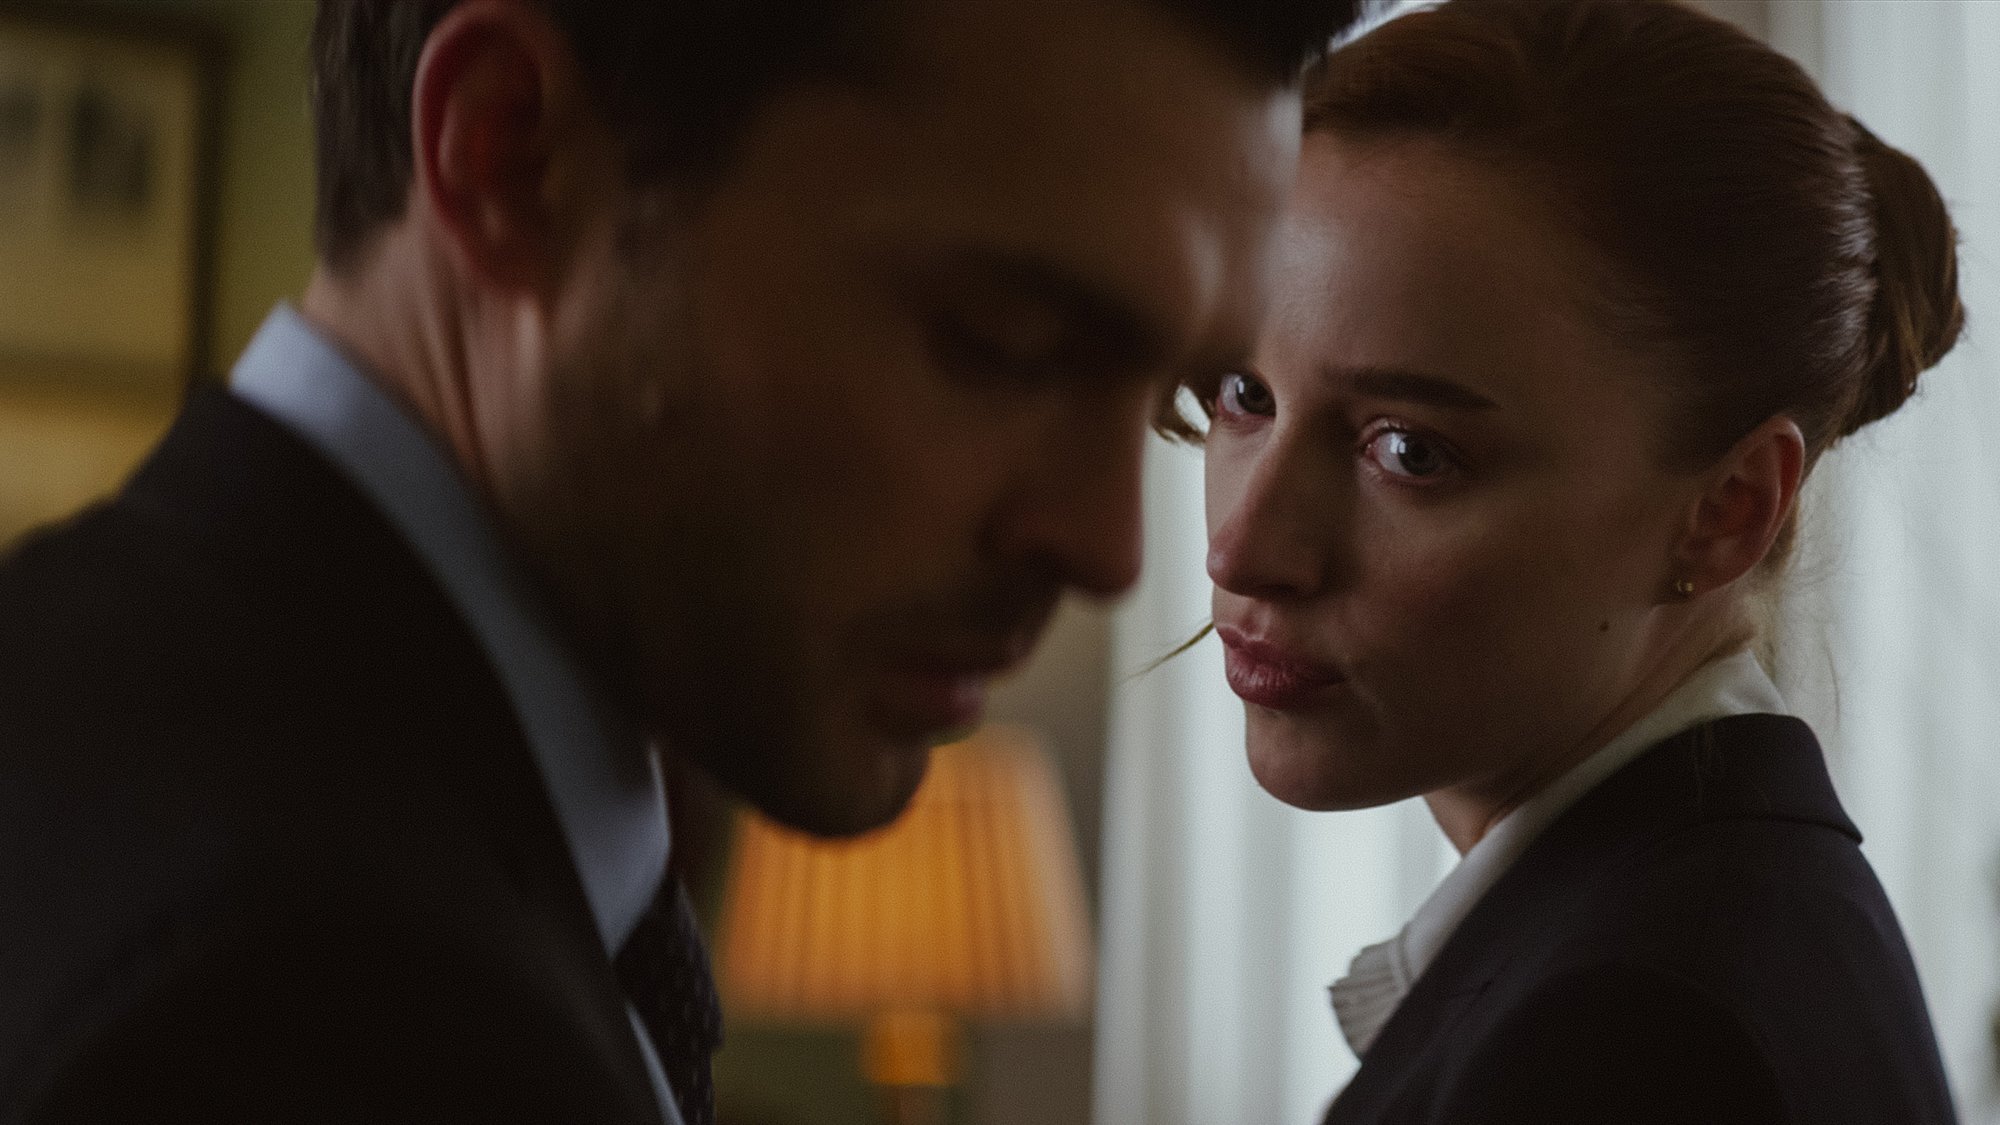 'Fair Play' Alden Ehrenreich as Luke and Phoebe Dynevor as Emily. Emily is looking at Luke, who is looking straight ahead from a profile